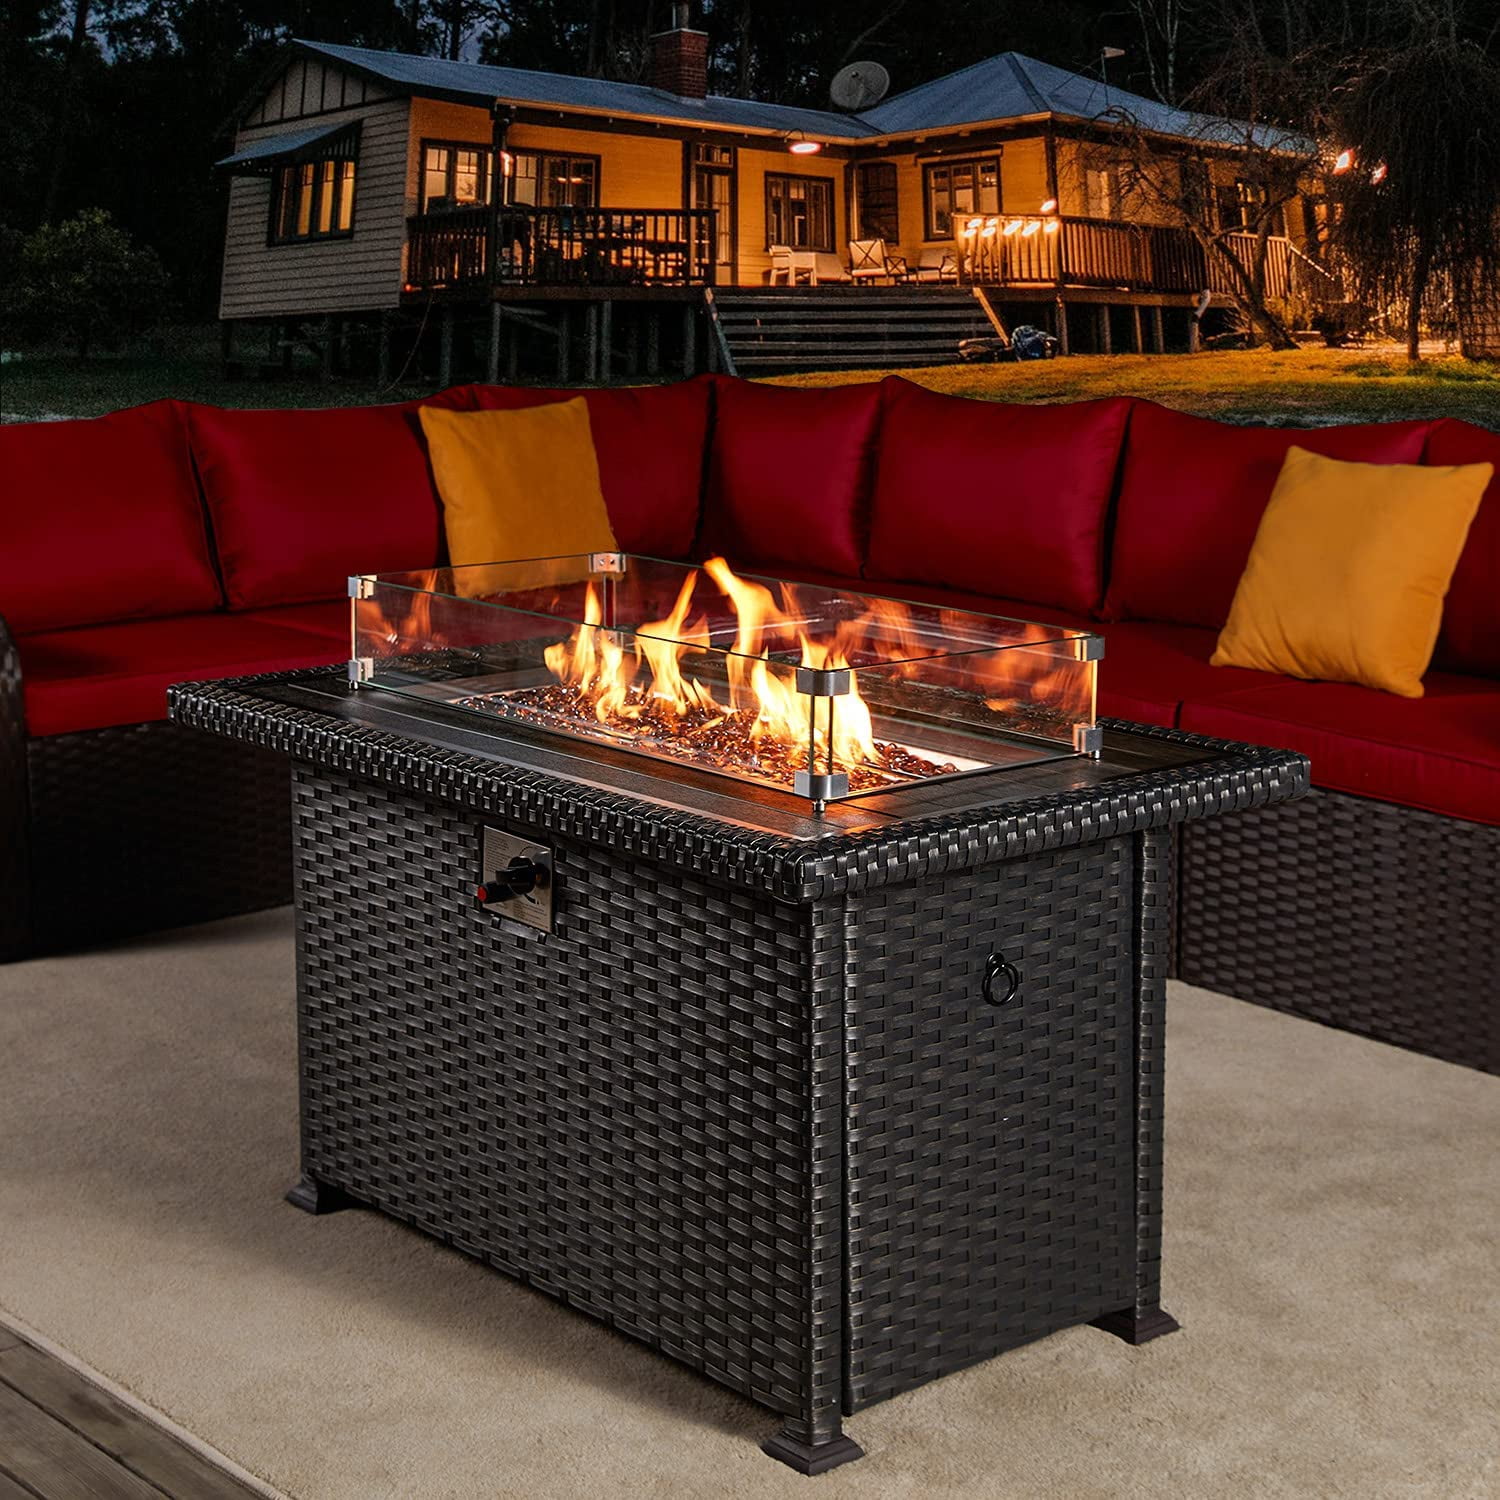 Waterproof Sunnydaze Outdoor Fire Pit Cover Heavy Duty 36 Inch Square Black